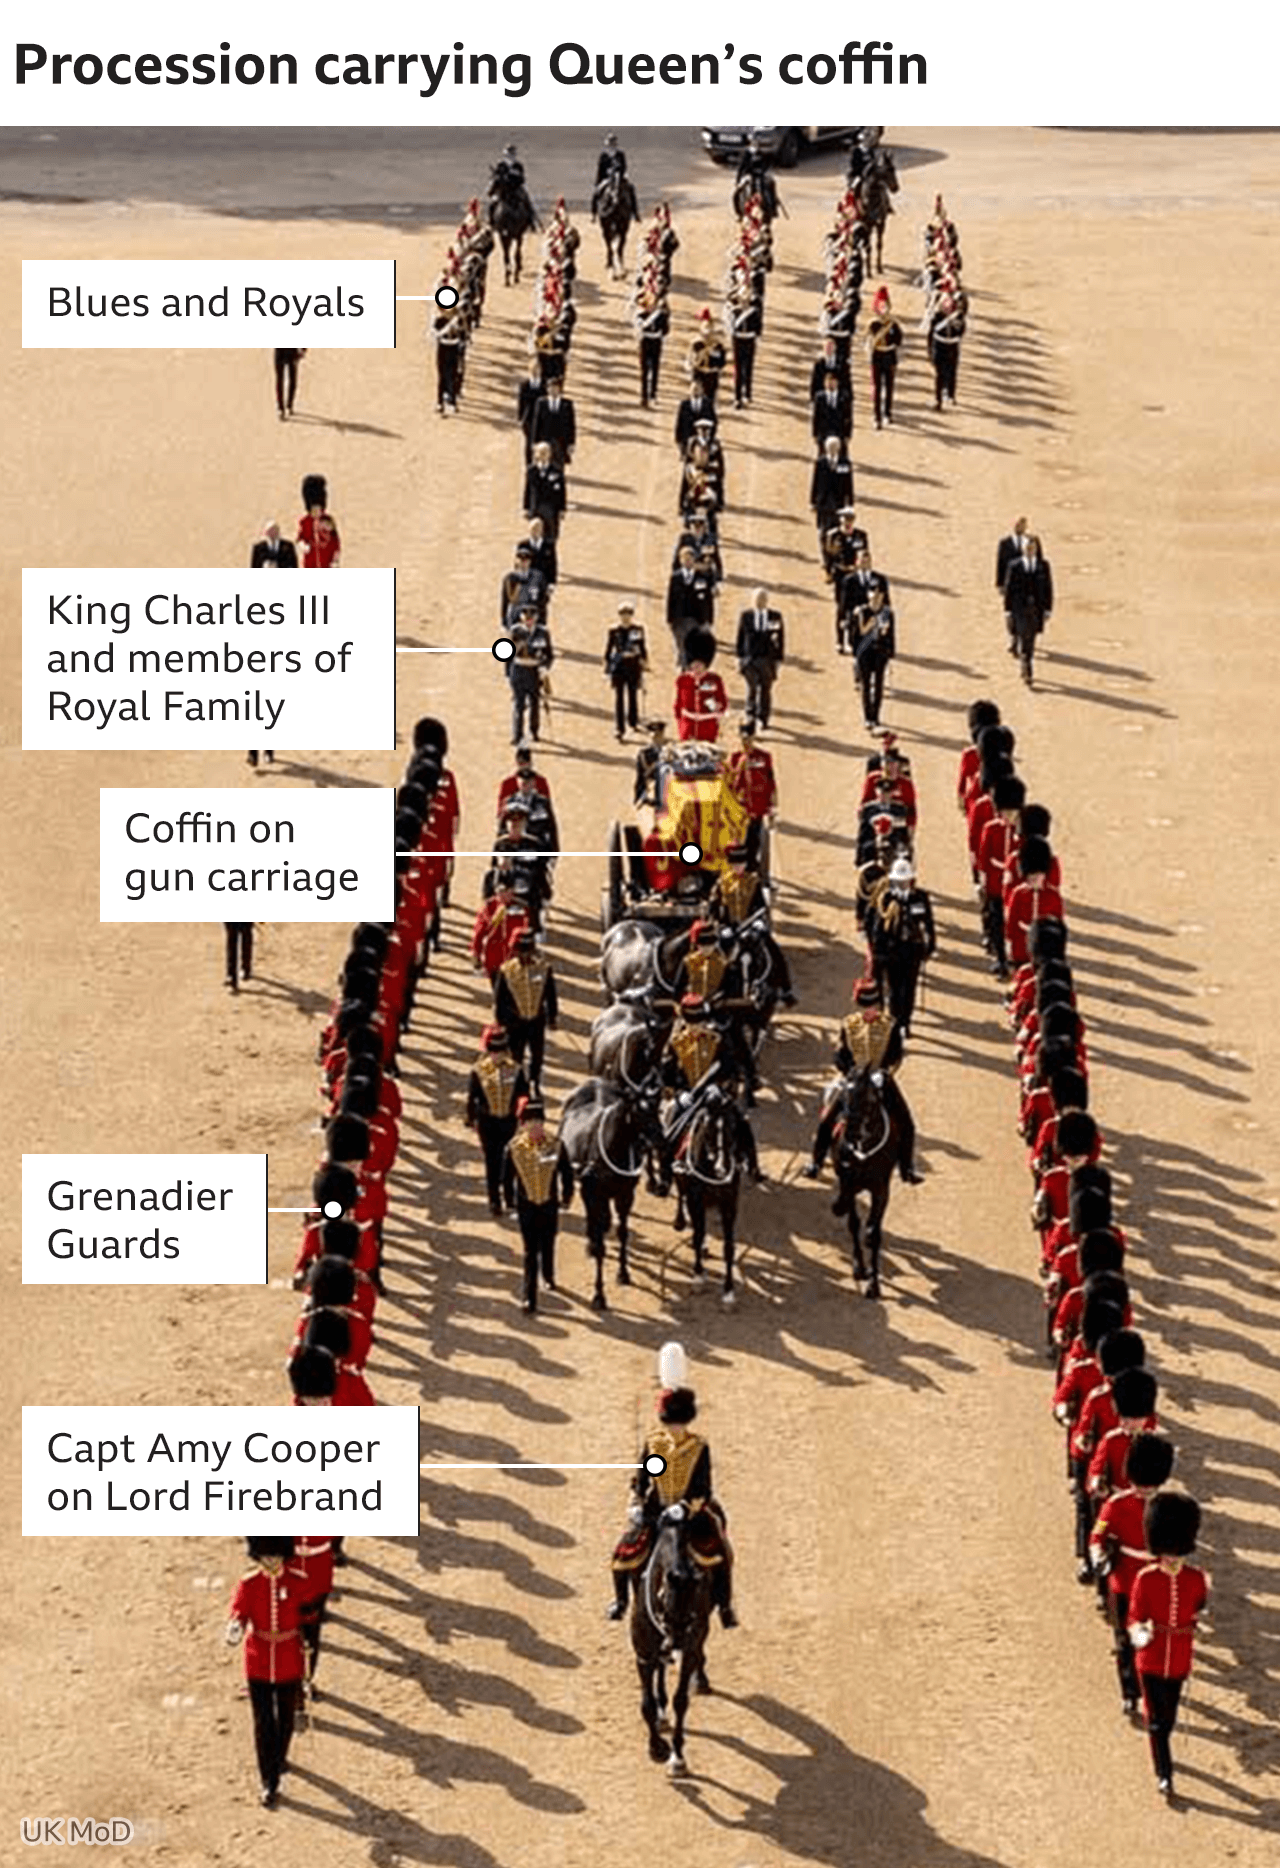 Annotated image of the Queen's coffin in procession